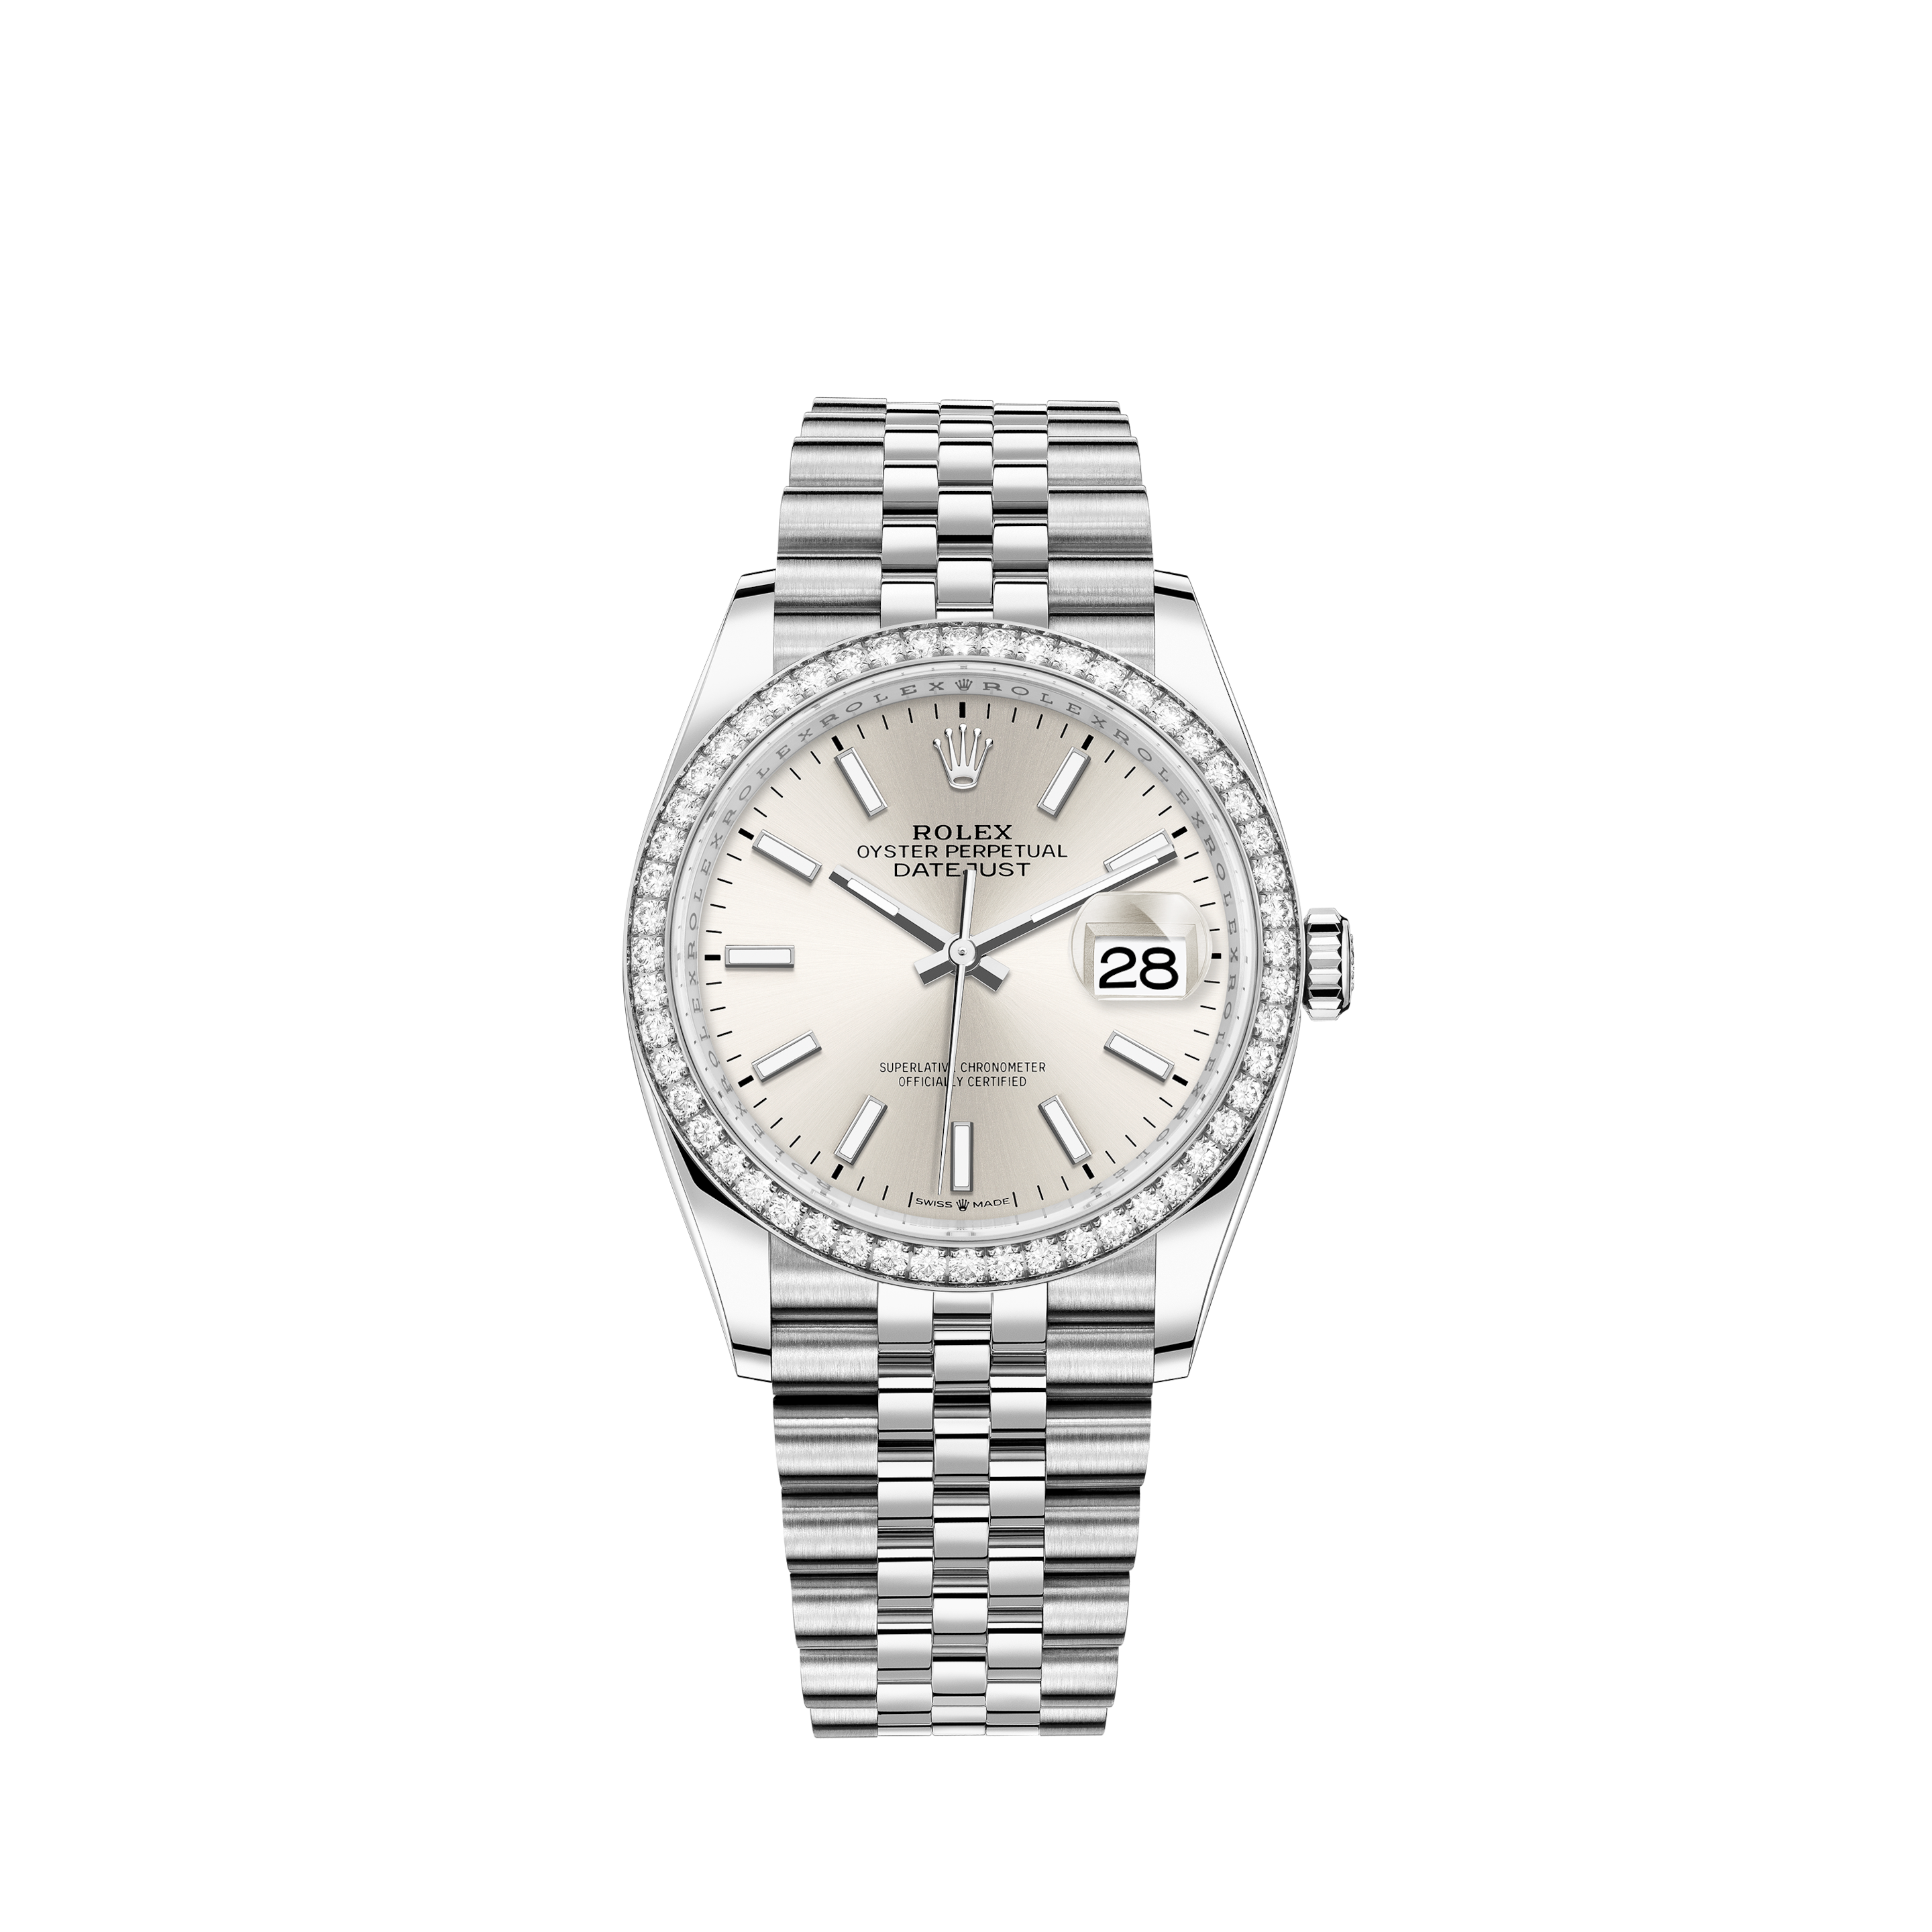 Rolex Oyster Perpetual Yacht-Master II White Gold 44mm